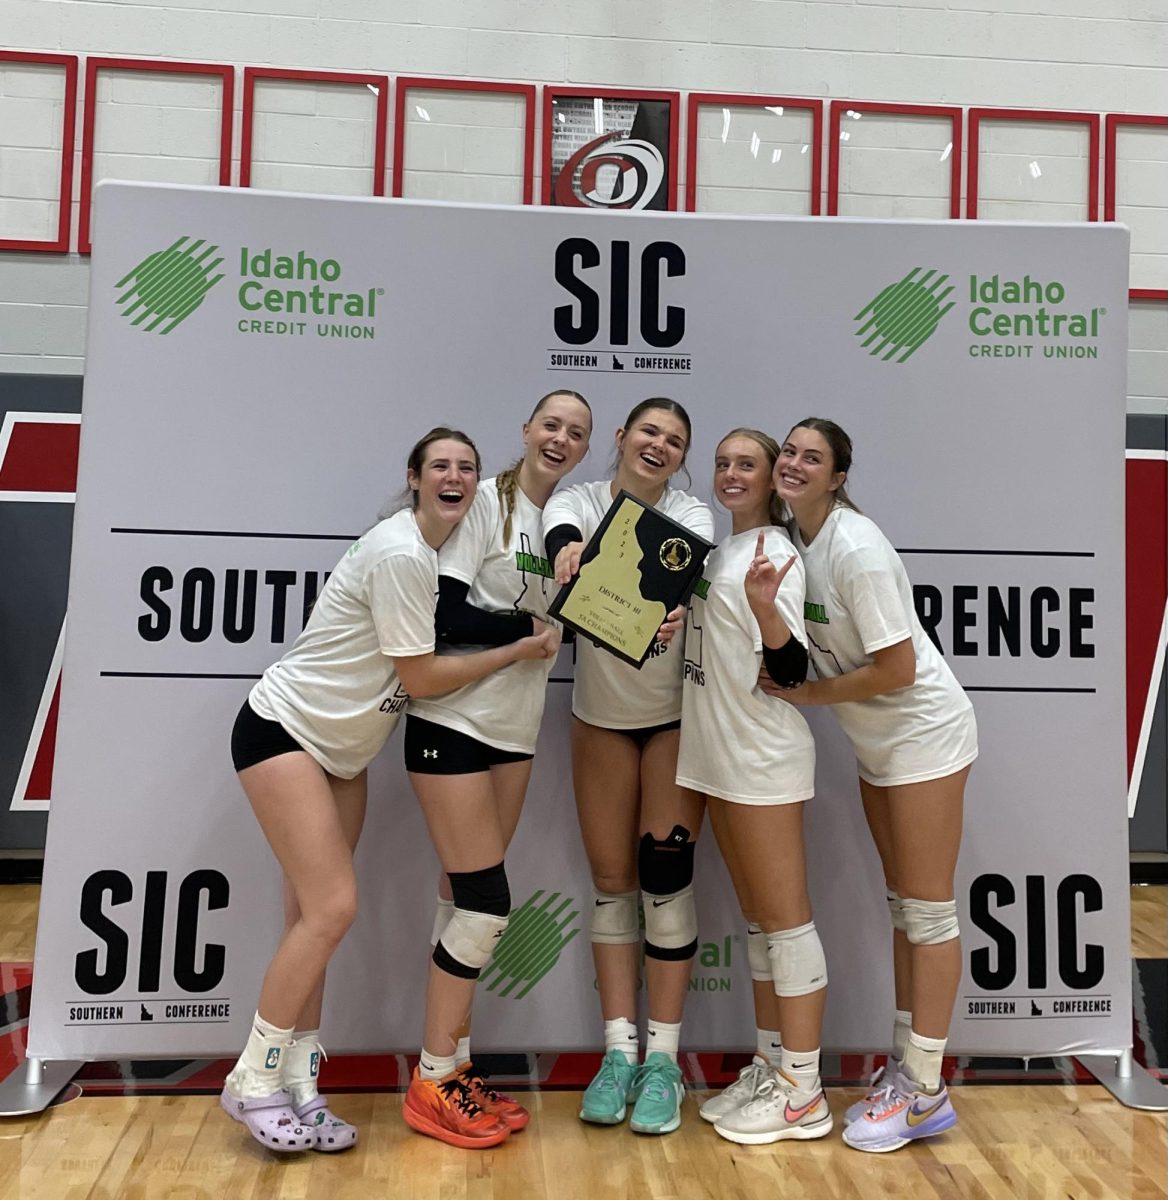 Eagle High’s volleyball team attended playoffs and set their sights on the state title. Despite their efforts, they placed second place for the state title.